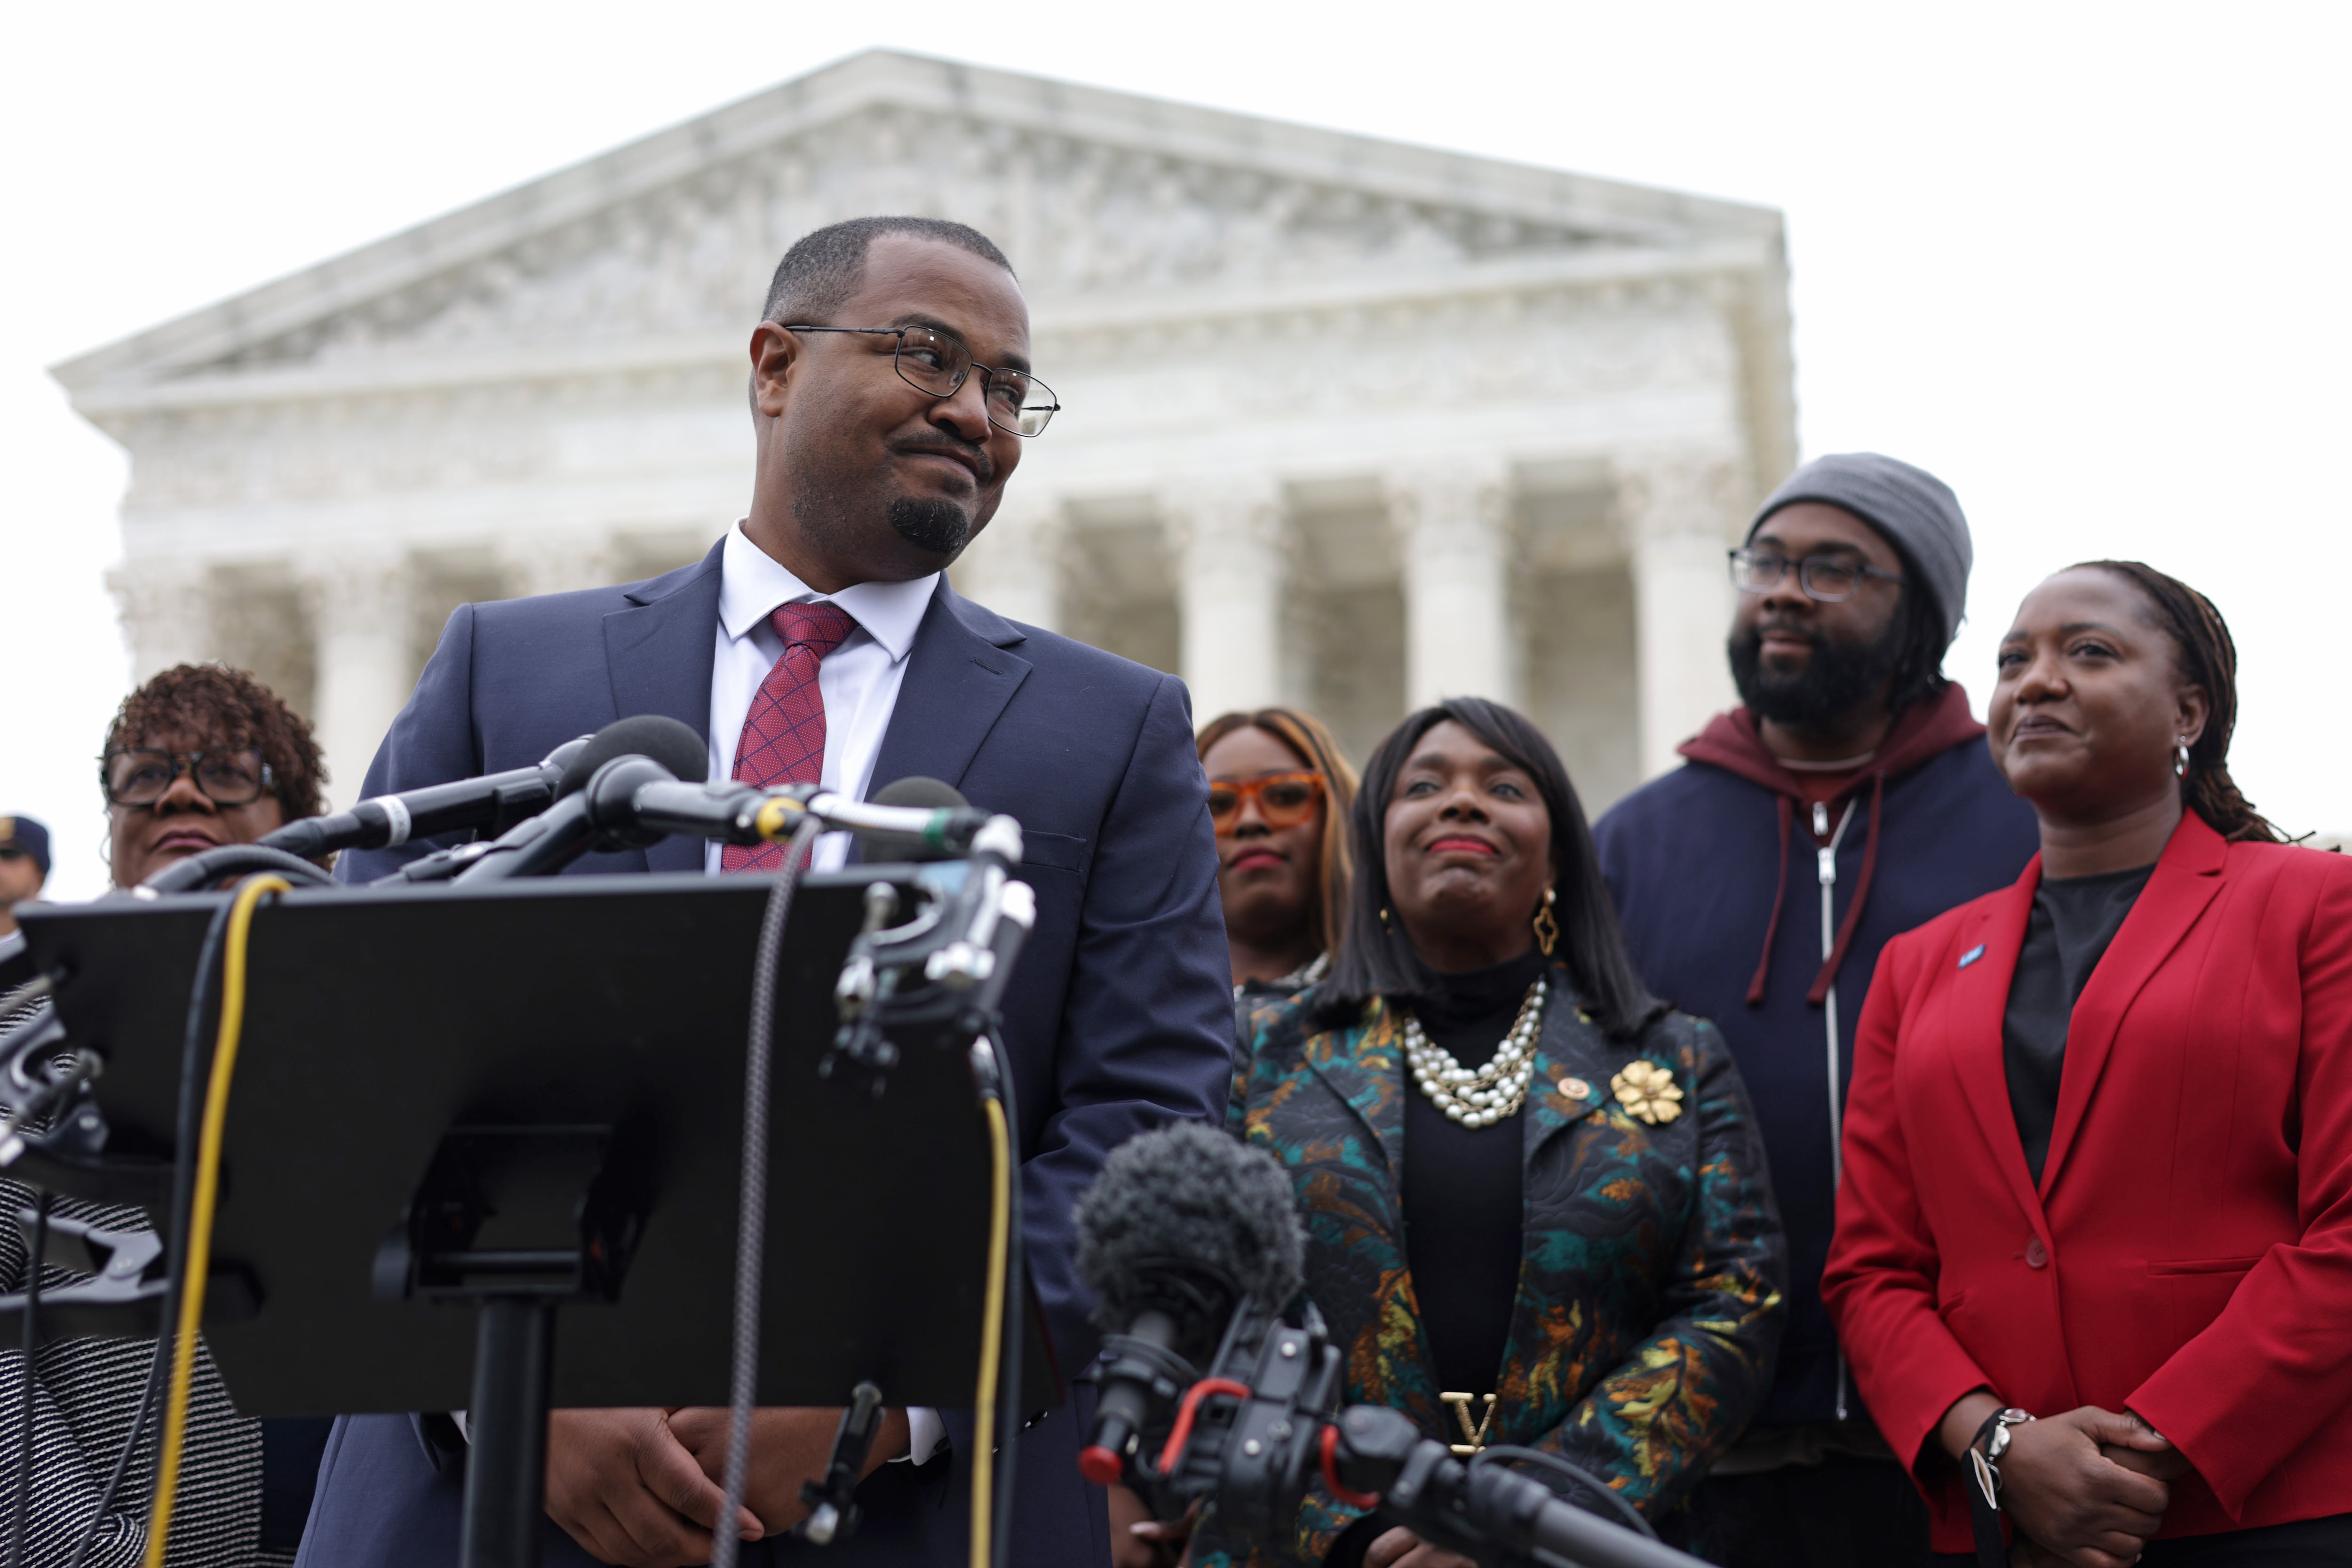 A man wearing glasses stands behind a podium with several microphones on it with several people standing behind him and the Supreme Court in the background.